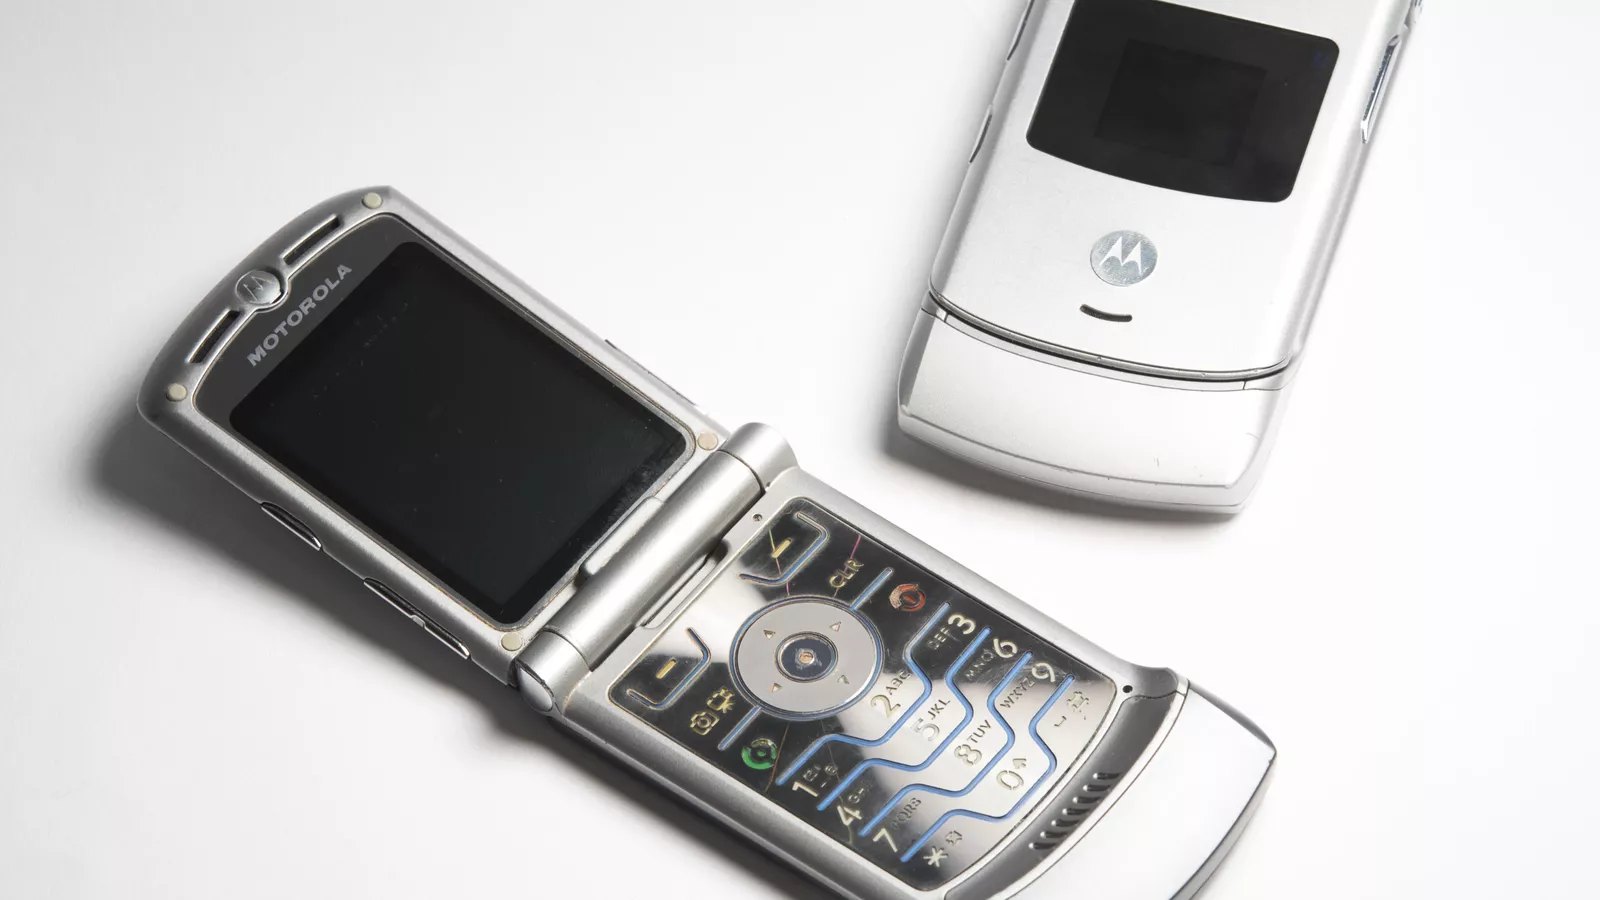 The Motorola Razr is rumoured to be making a comeback for 2019 as